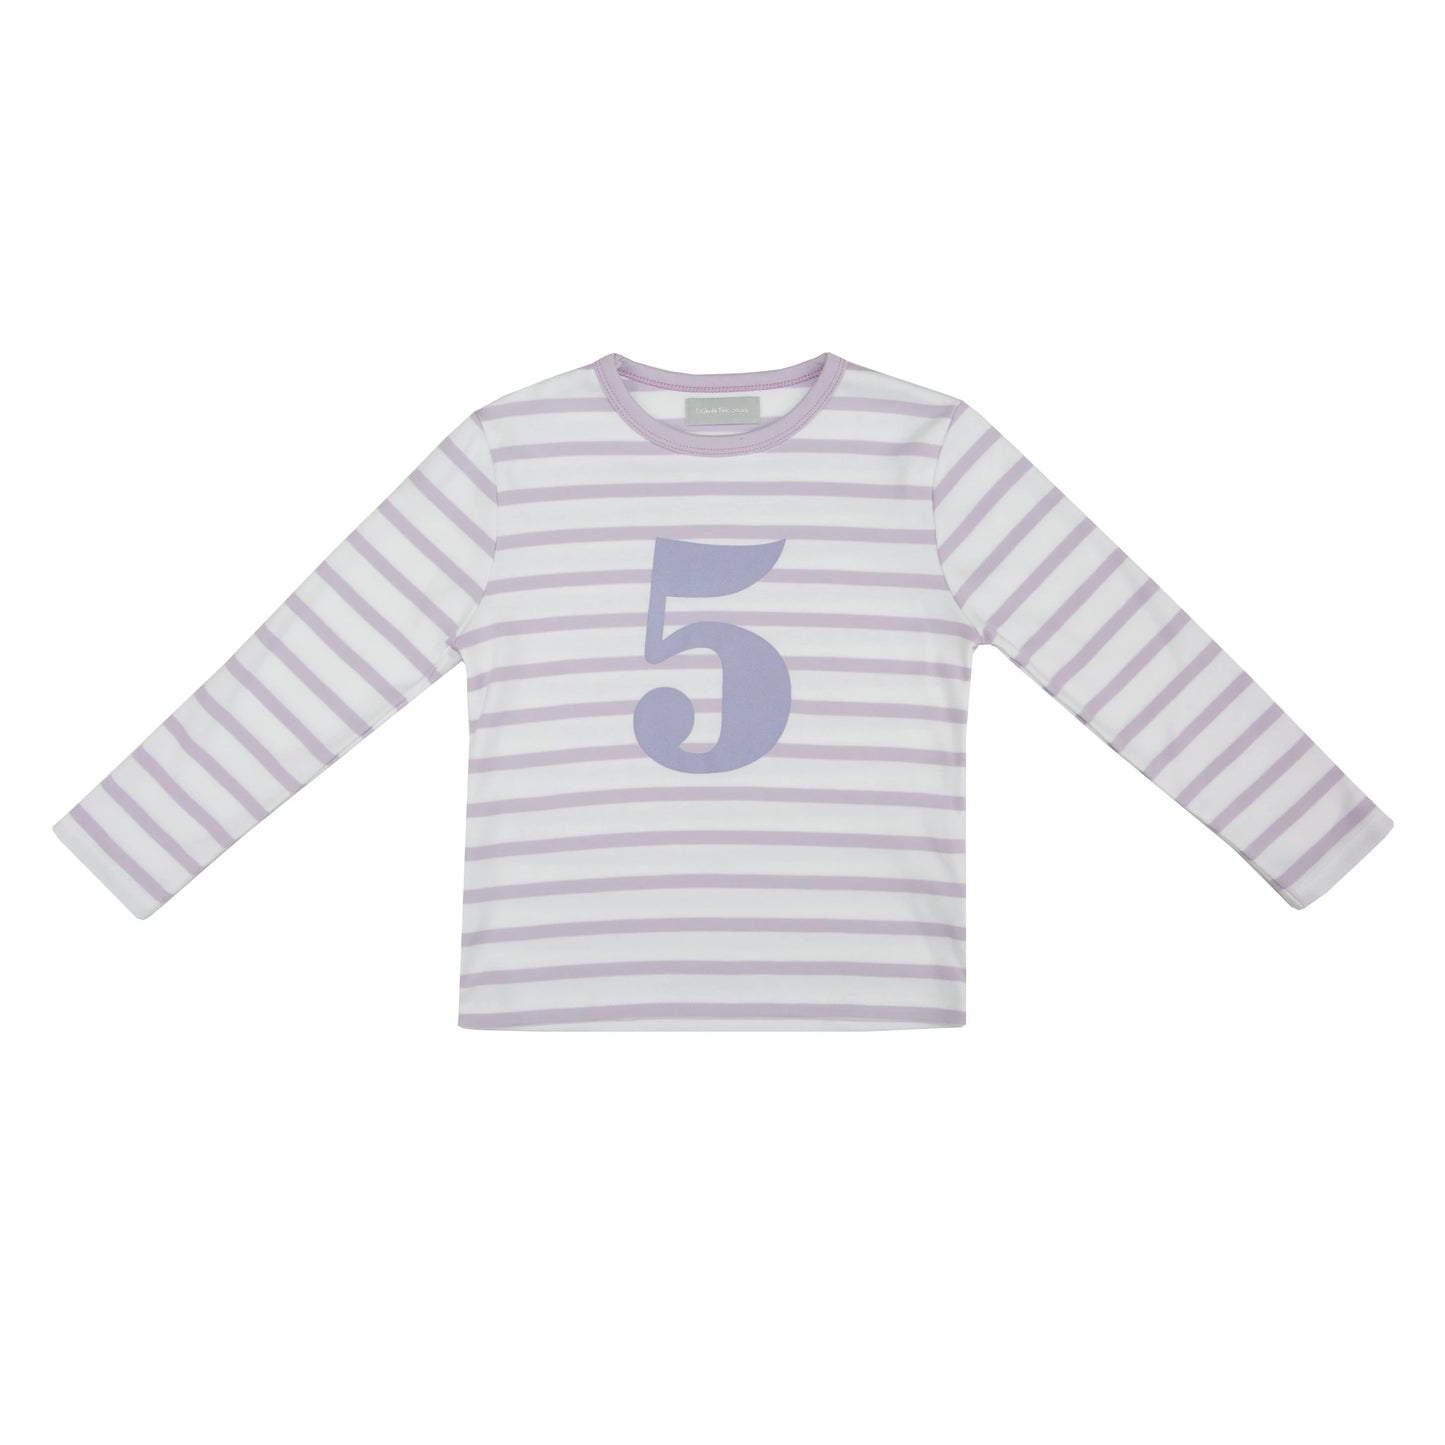 Age 5 Parma Violet and White Breton Striped Number T Shirt